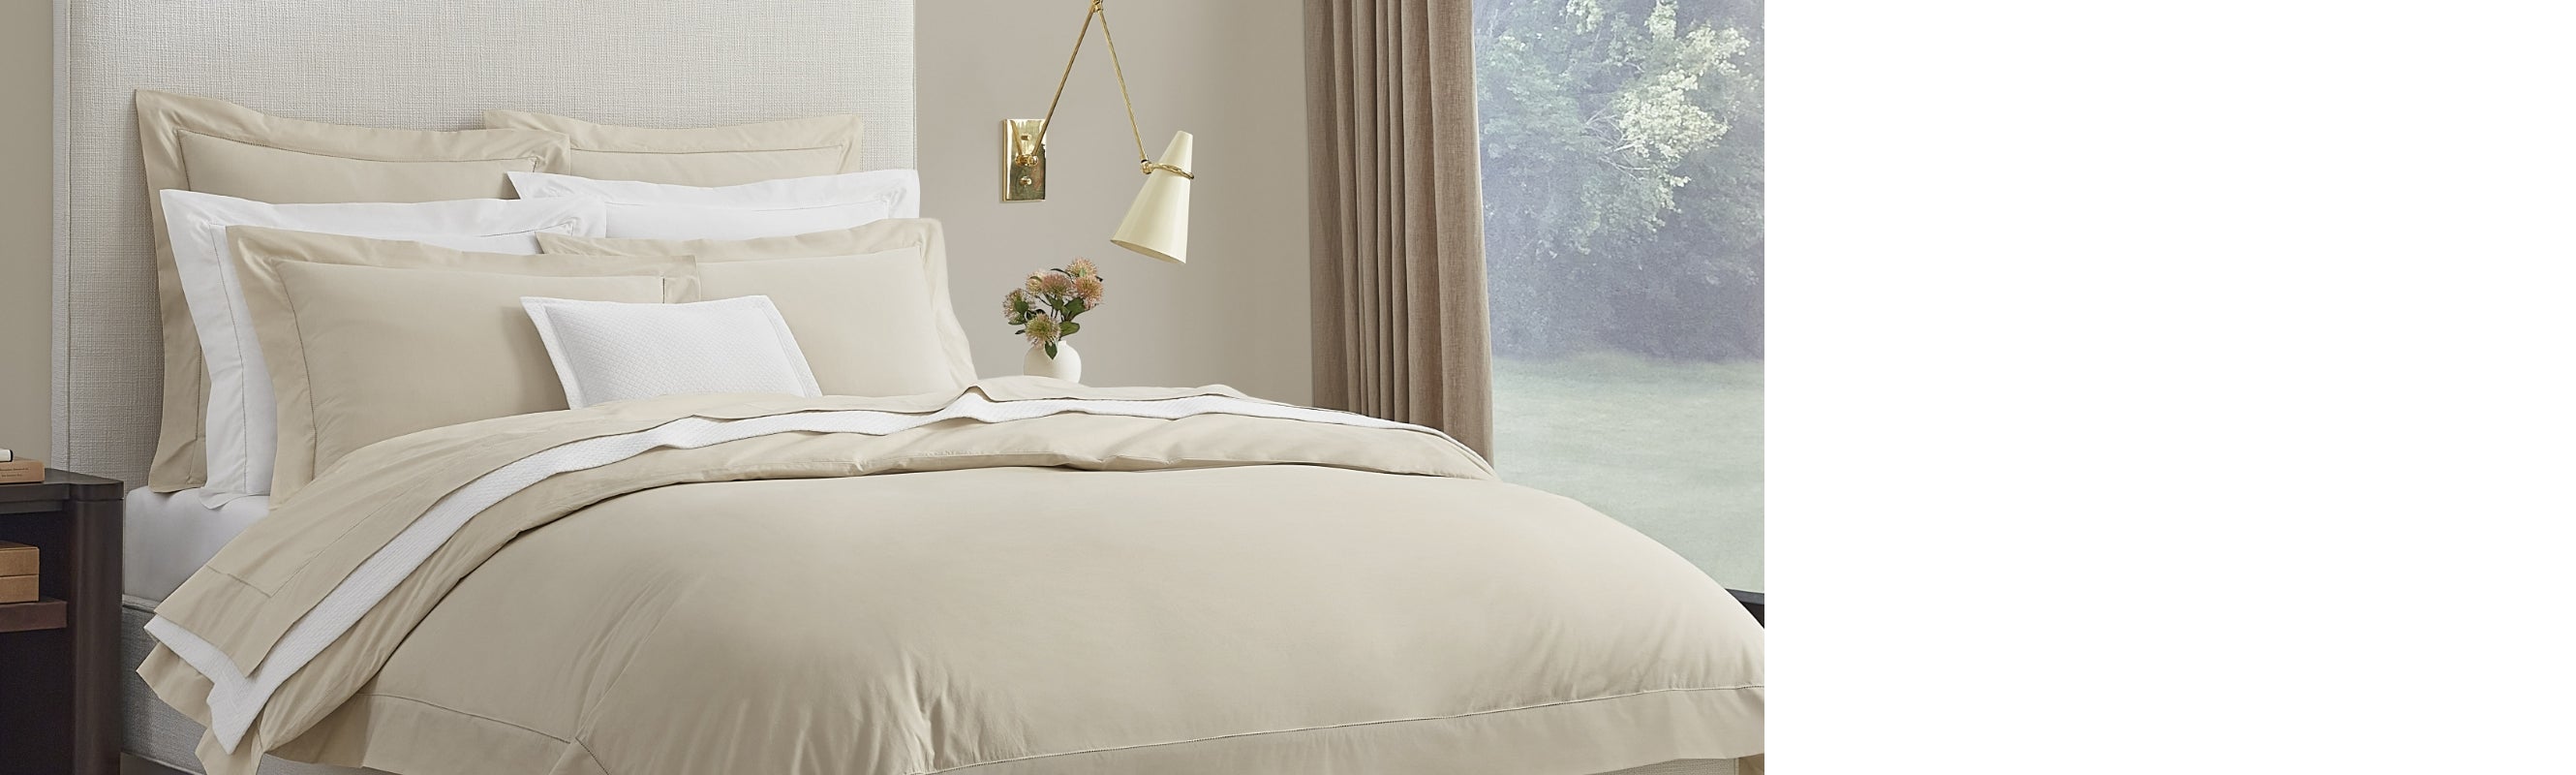 Best-Selling Bedding